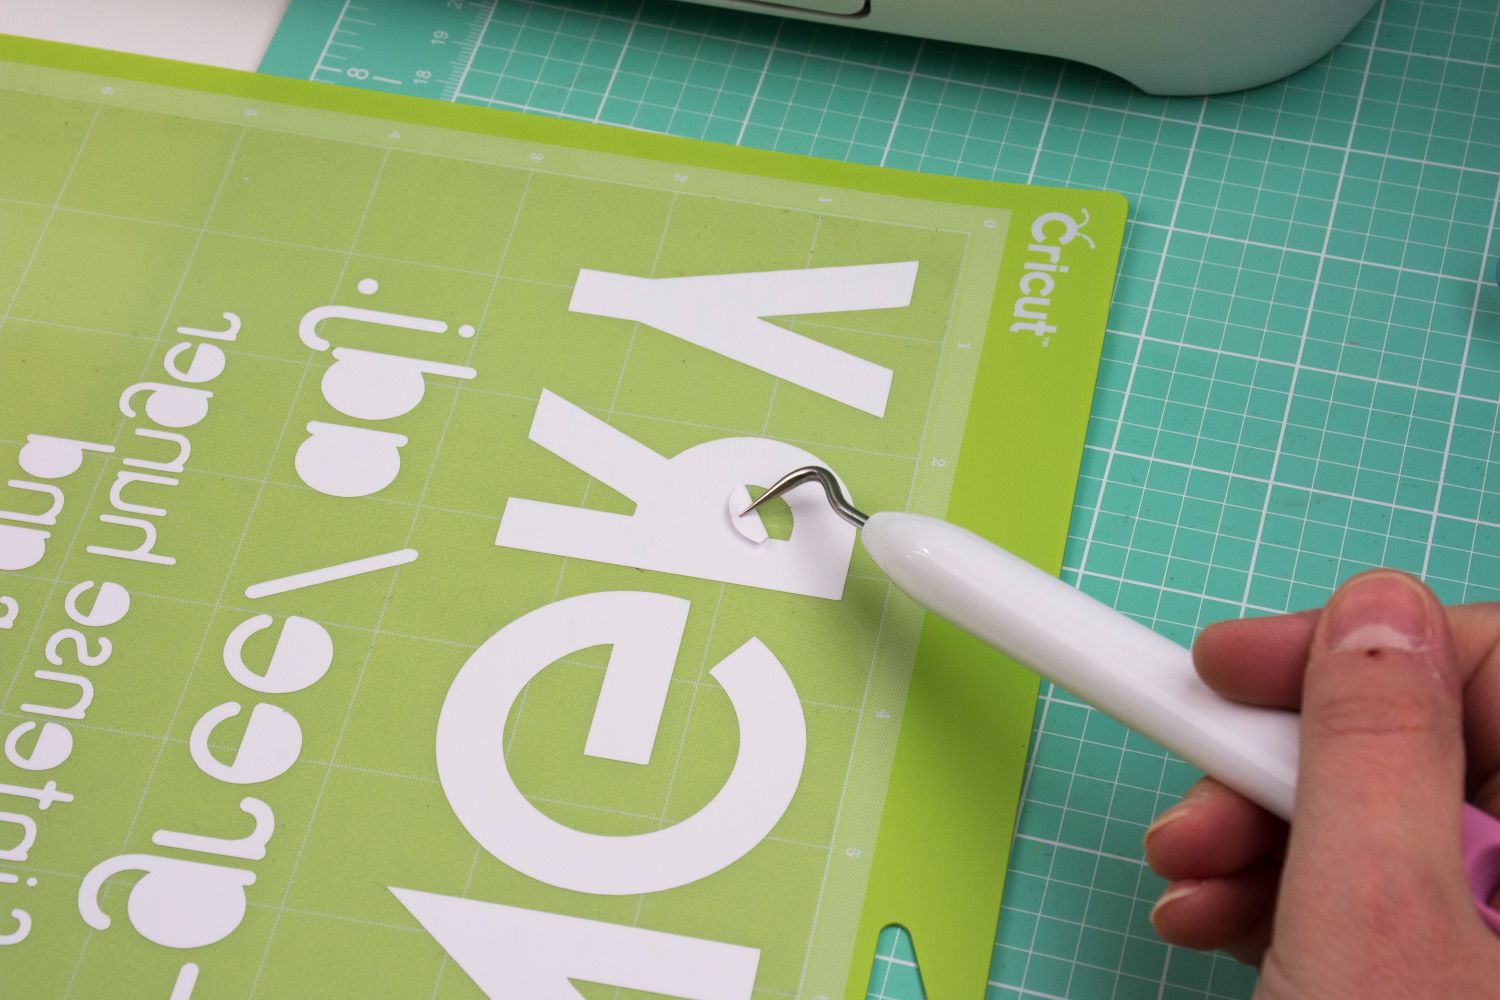 How to Make Vinyl Decals with Cricut Explore Air 2 - Creative Housewives